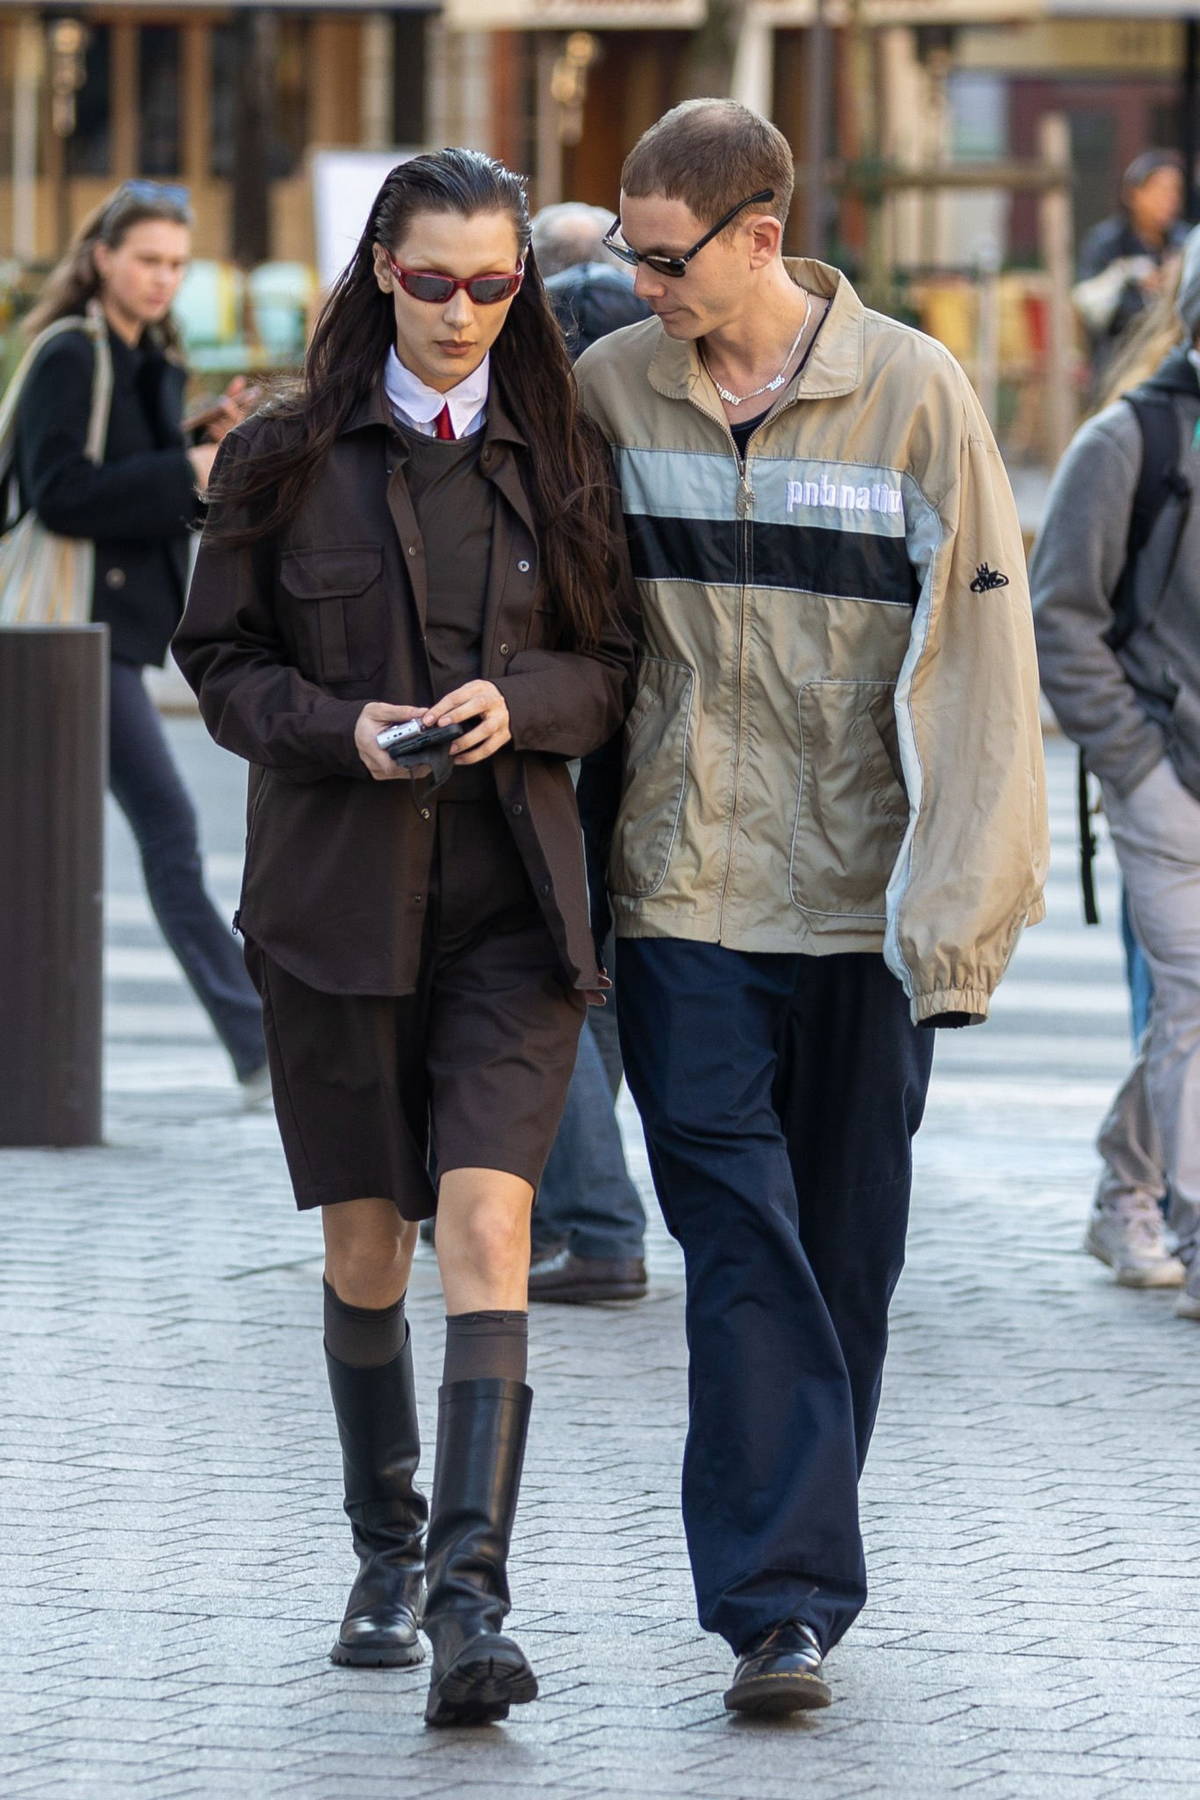 Bella Hadid and boyfriend Marc Kalman step out together in Paris, France